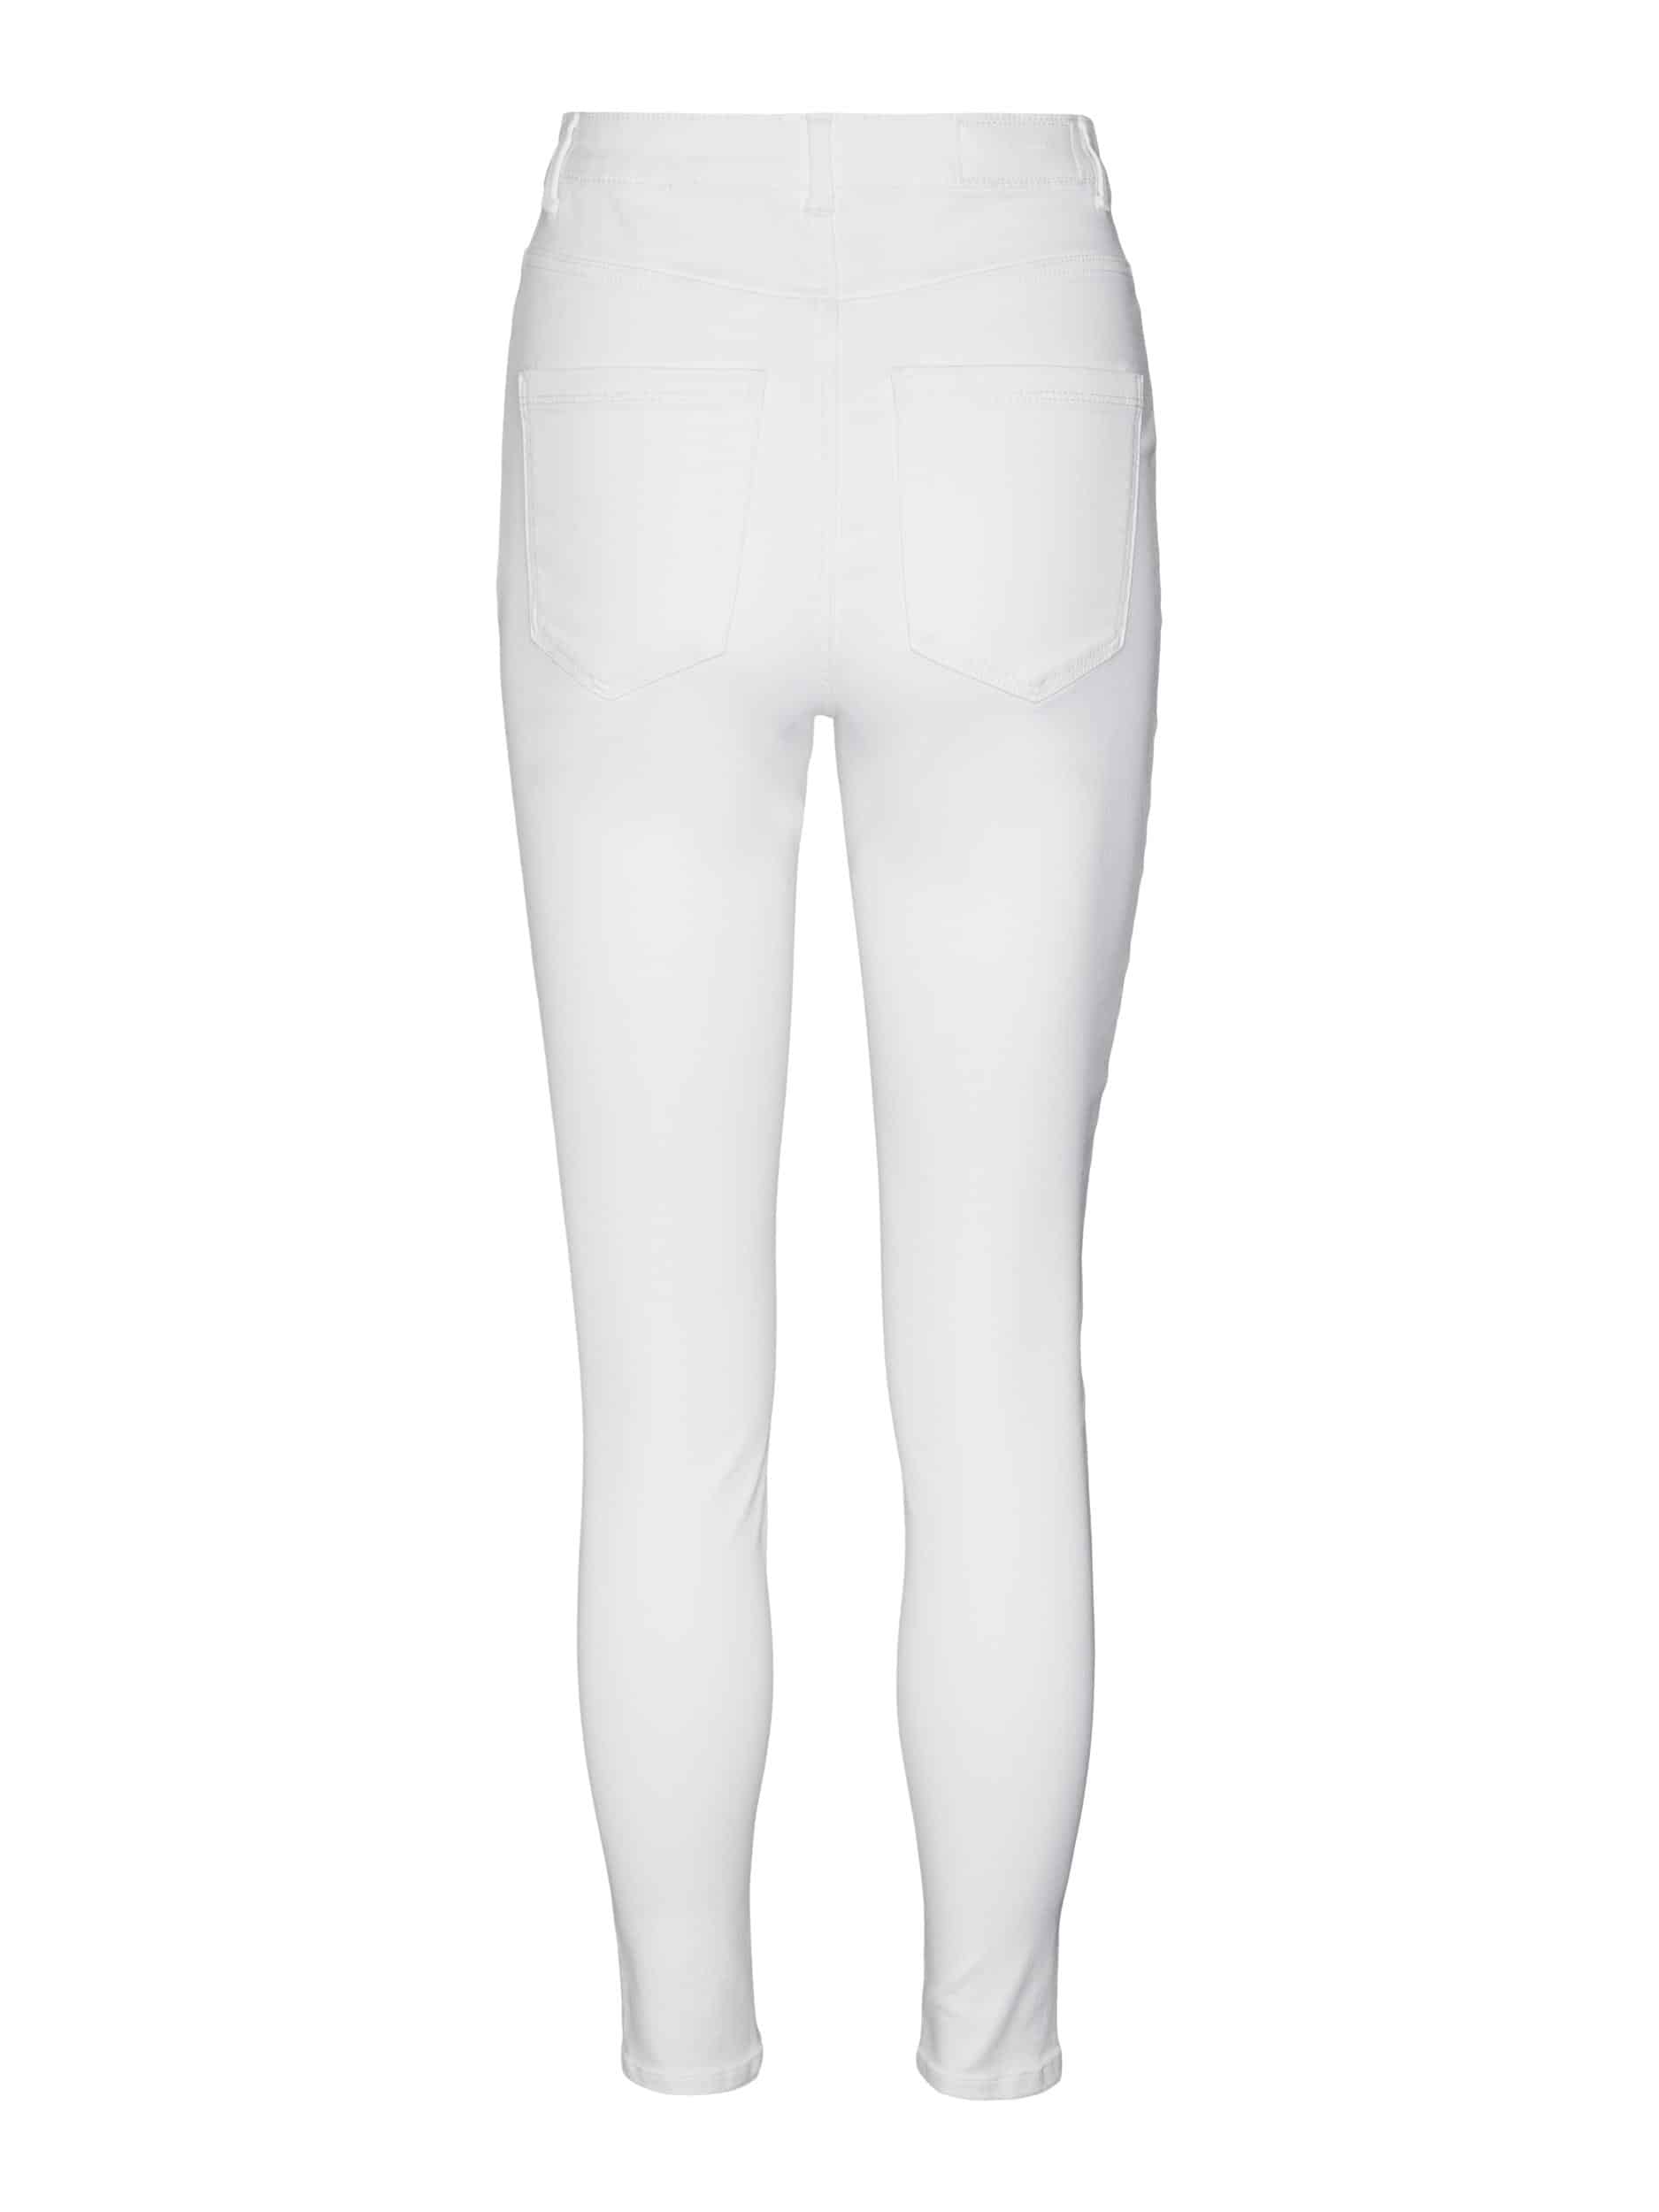 Sophia Skinny Jeans - Bright White - Out and About